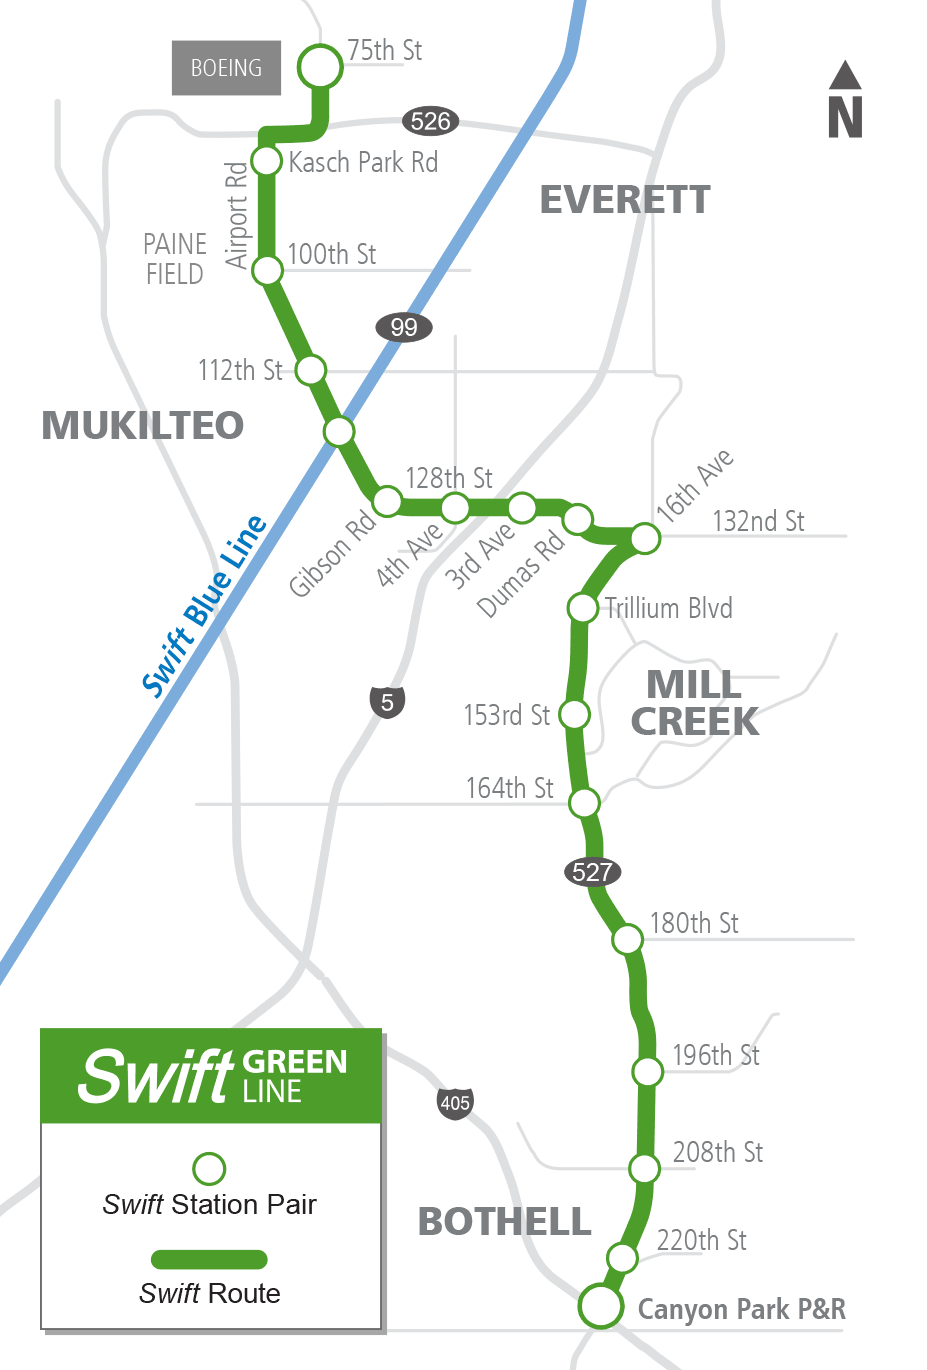 Swift Green Line planned for Autumn 2018. (Community Transit)